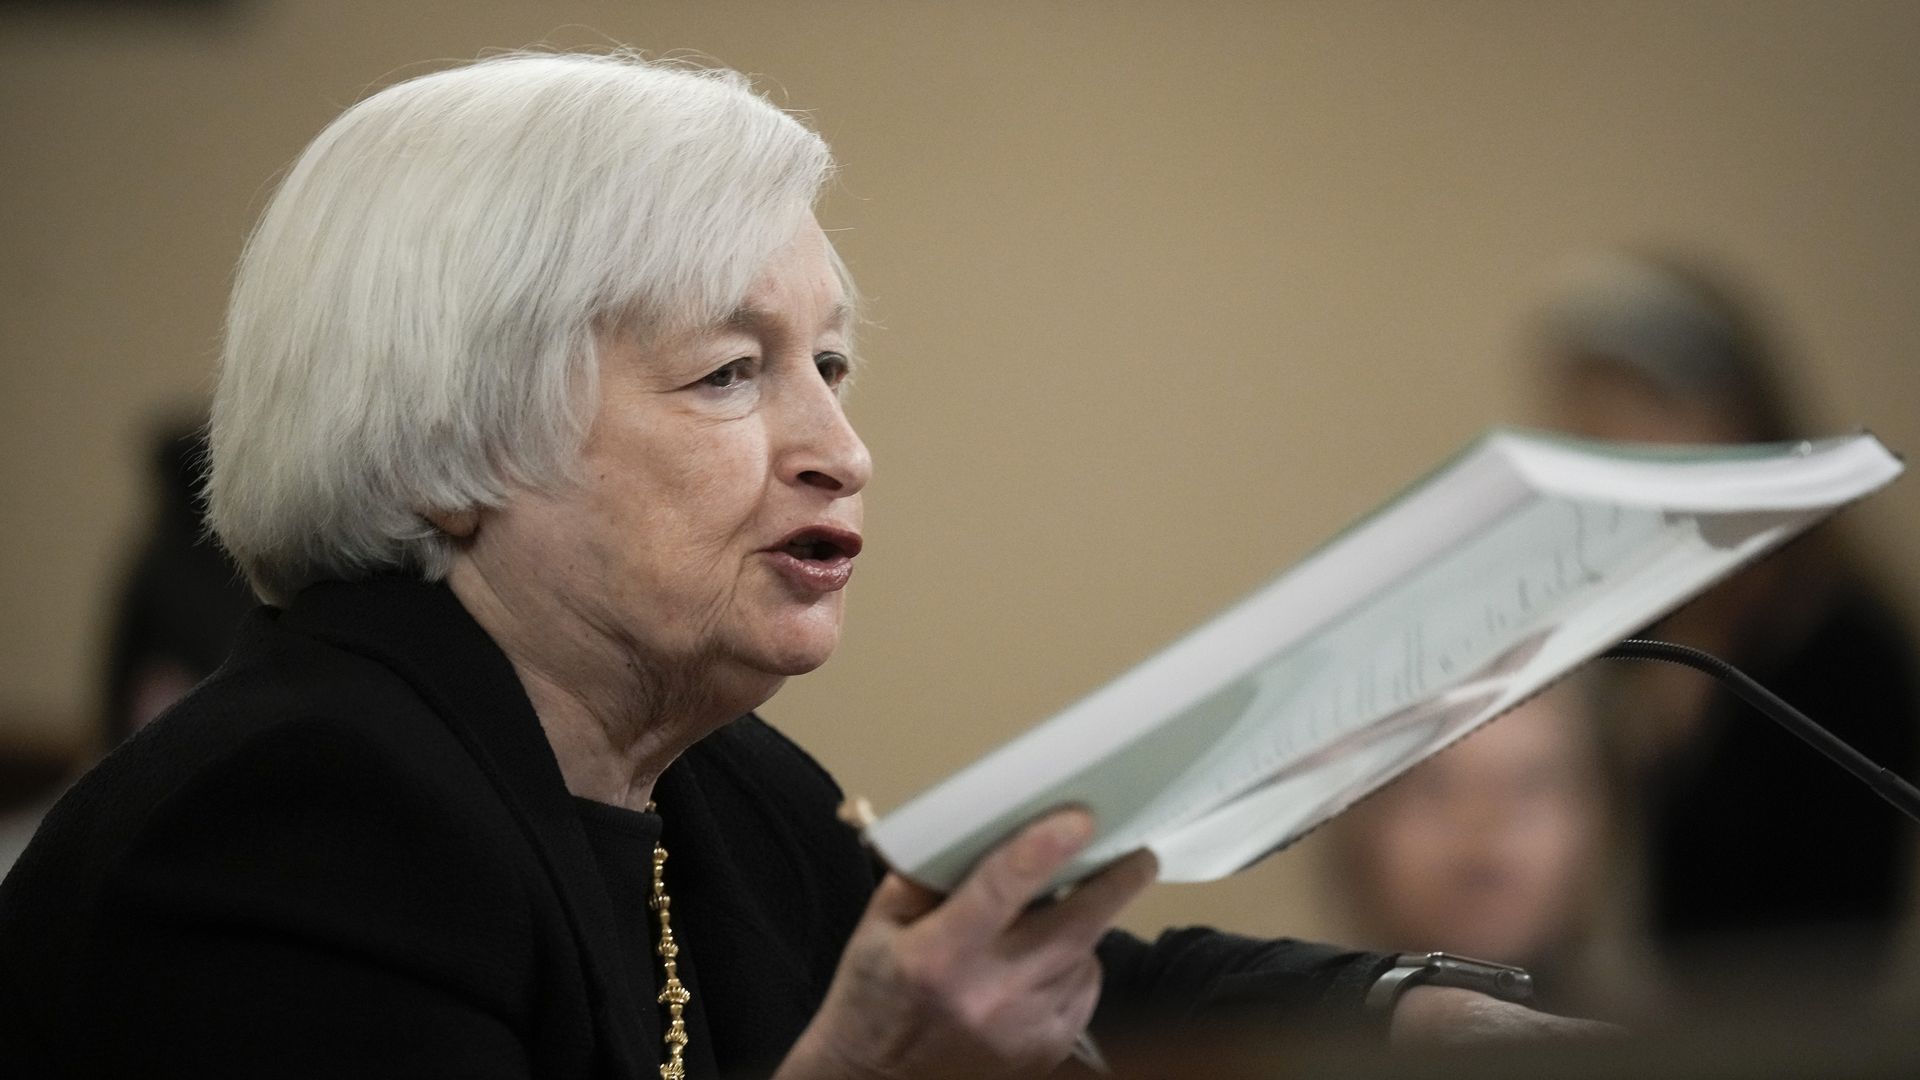 anet Yellen holds up a copy of the Treasury Departments Greenbook